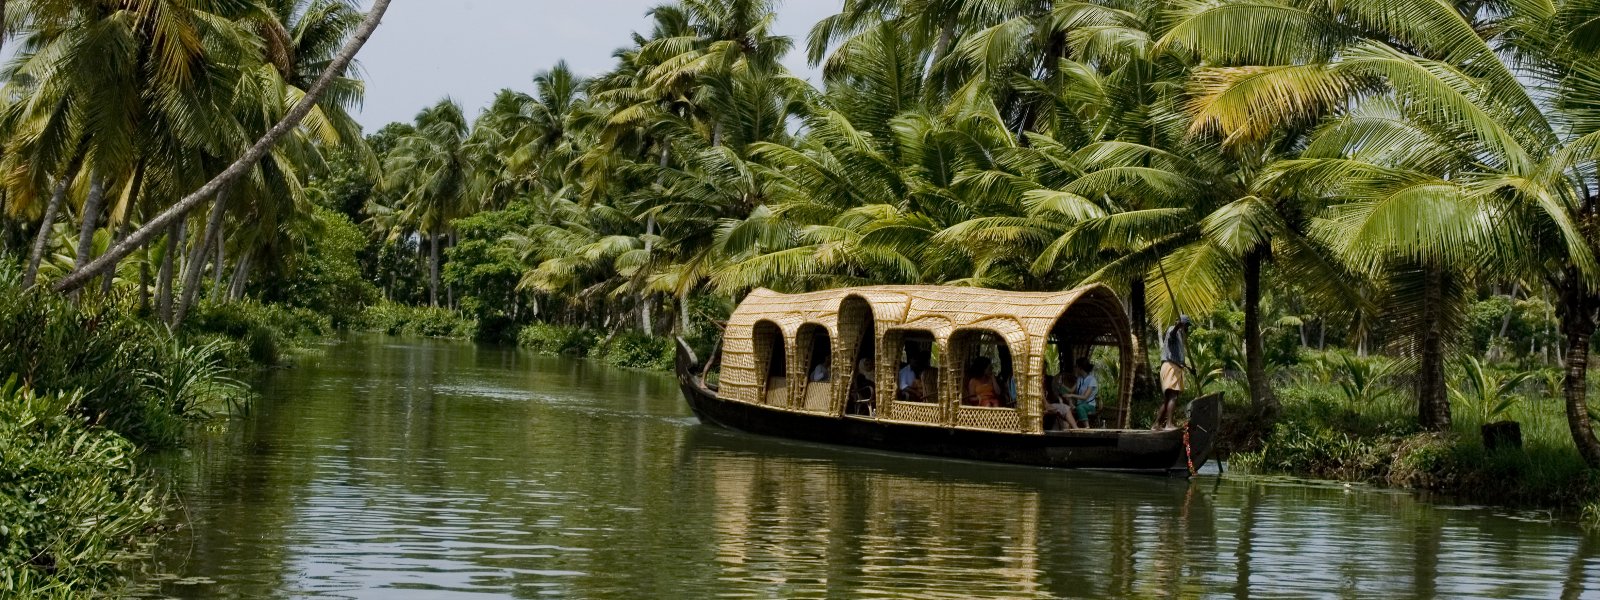 The Houseboat Cruises in Kerala, Aleppey – Truly magical!